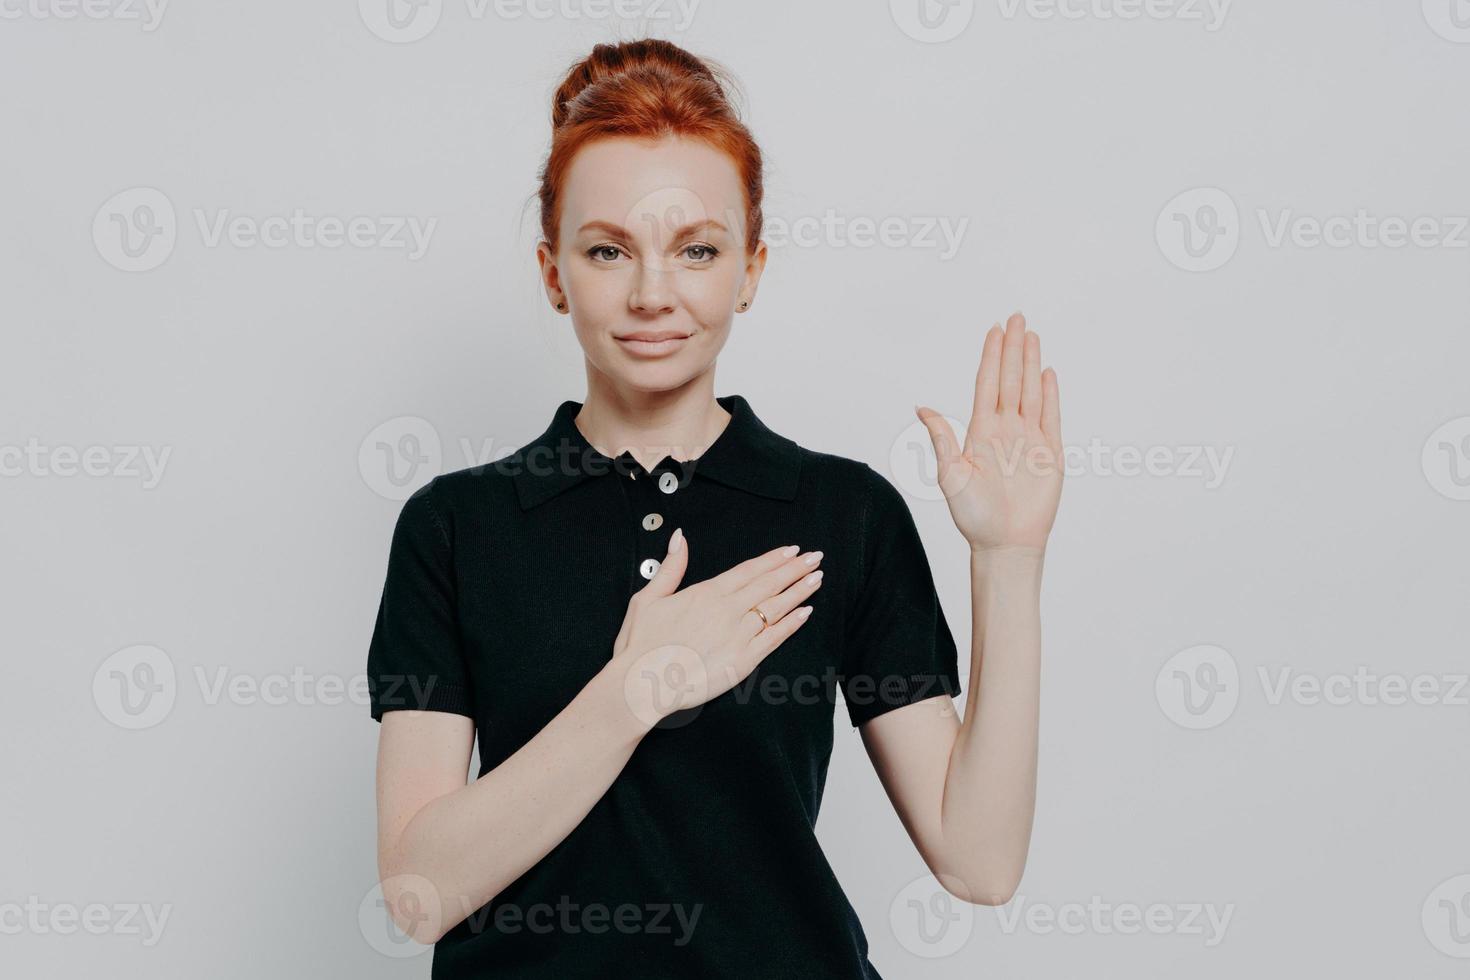 tudio shot of serious red haired female making promise, swearing with hand on chest in studio photo